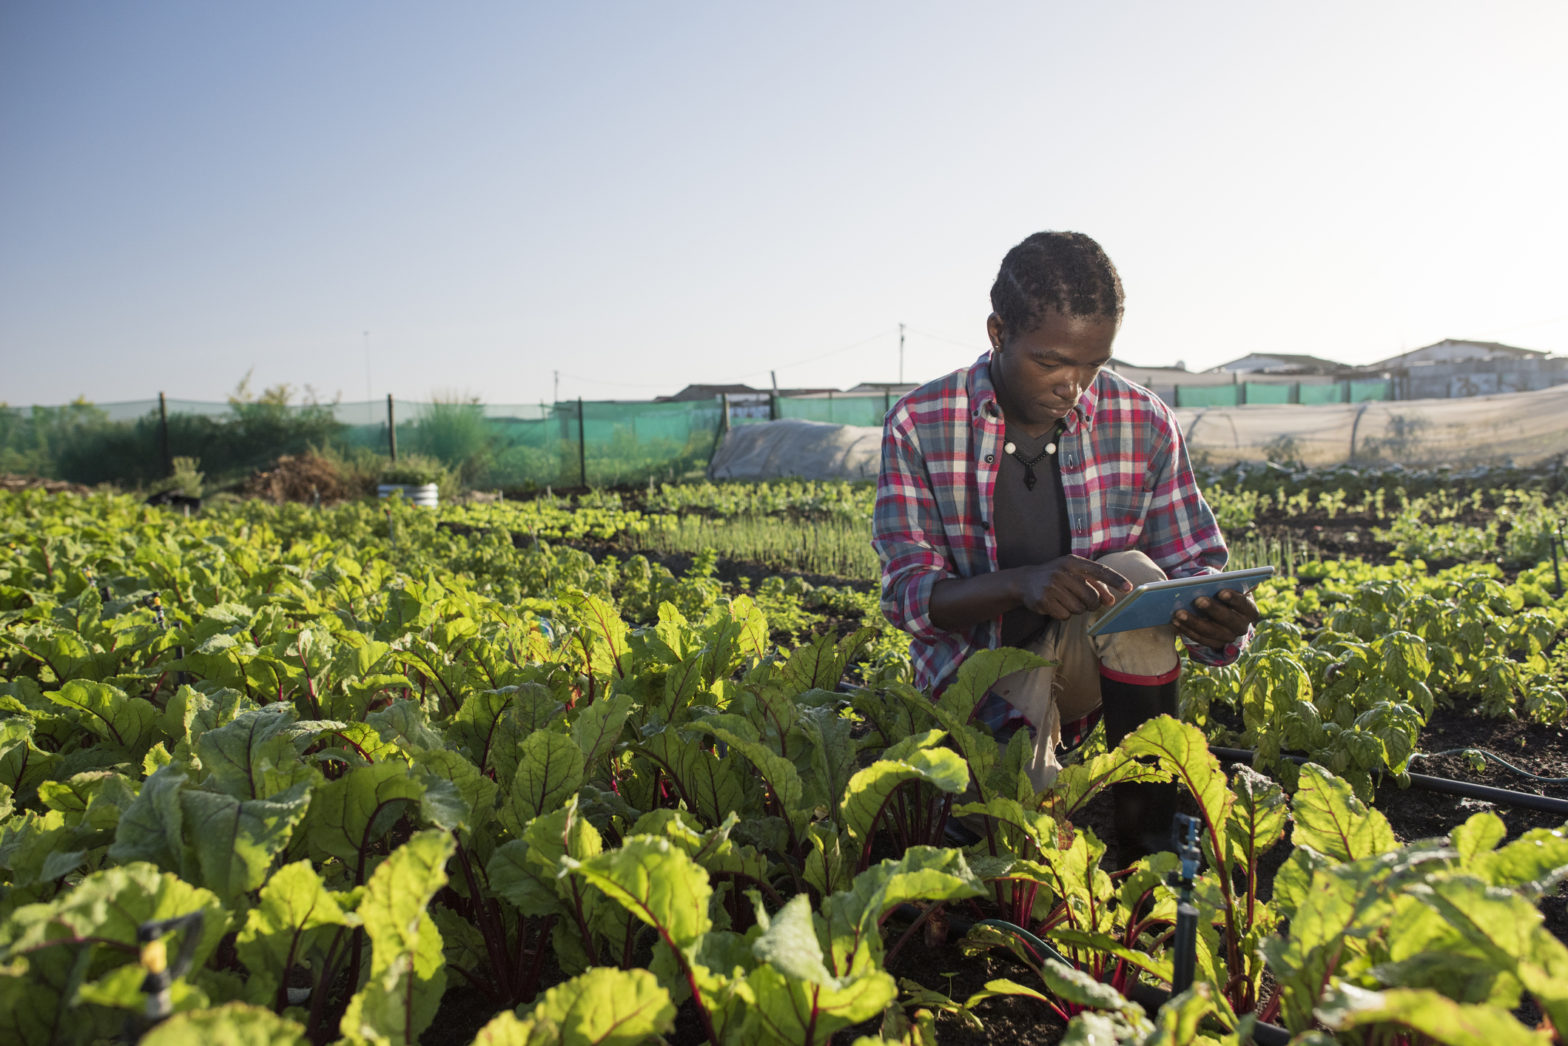 Youth African Agritech Innovators Receive $1.5M Investment To Accelerate Agriculture Across Africa